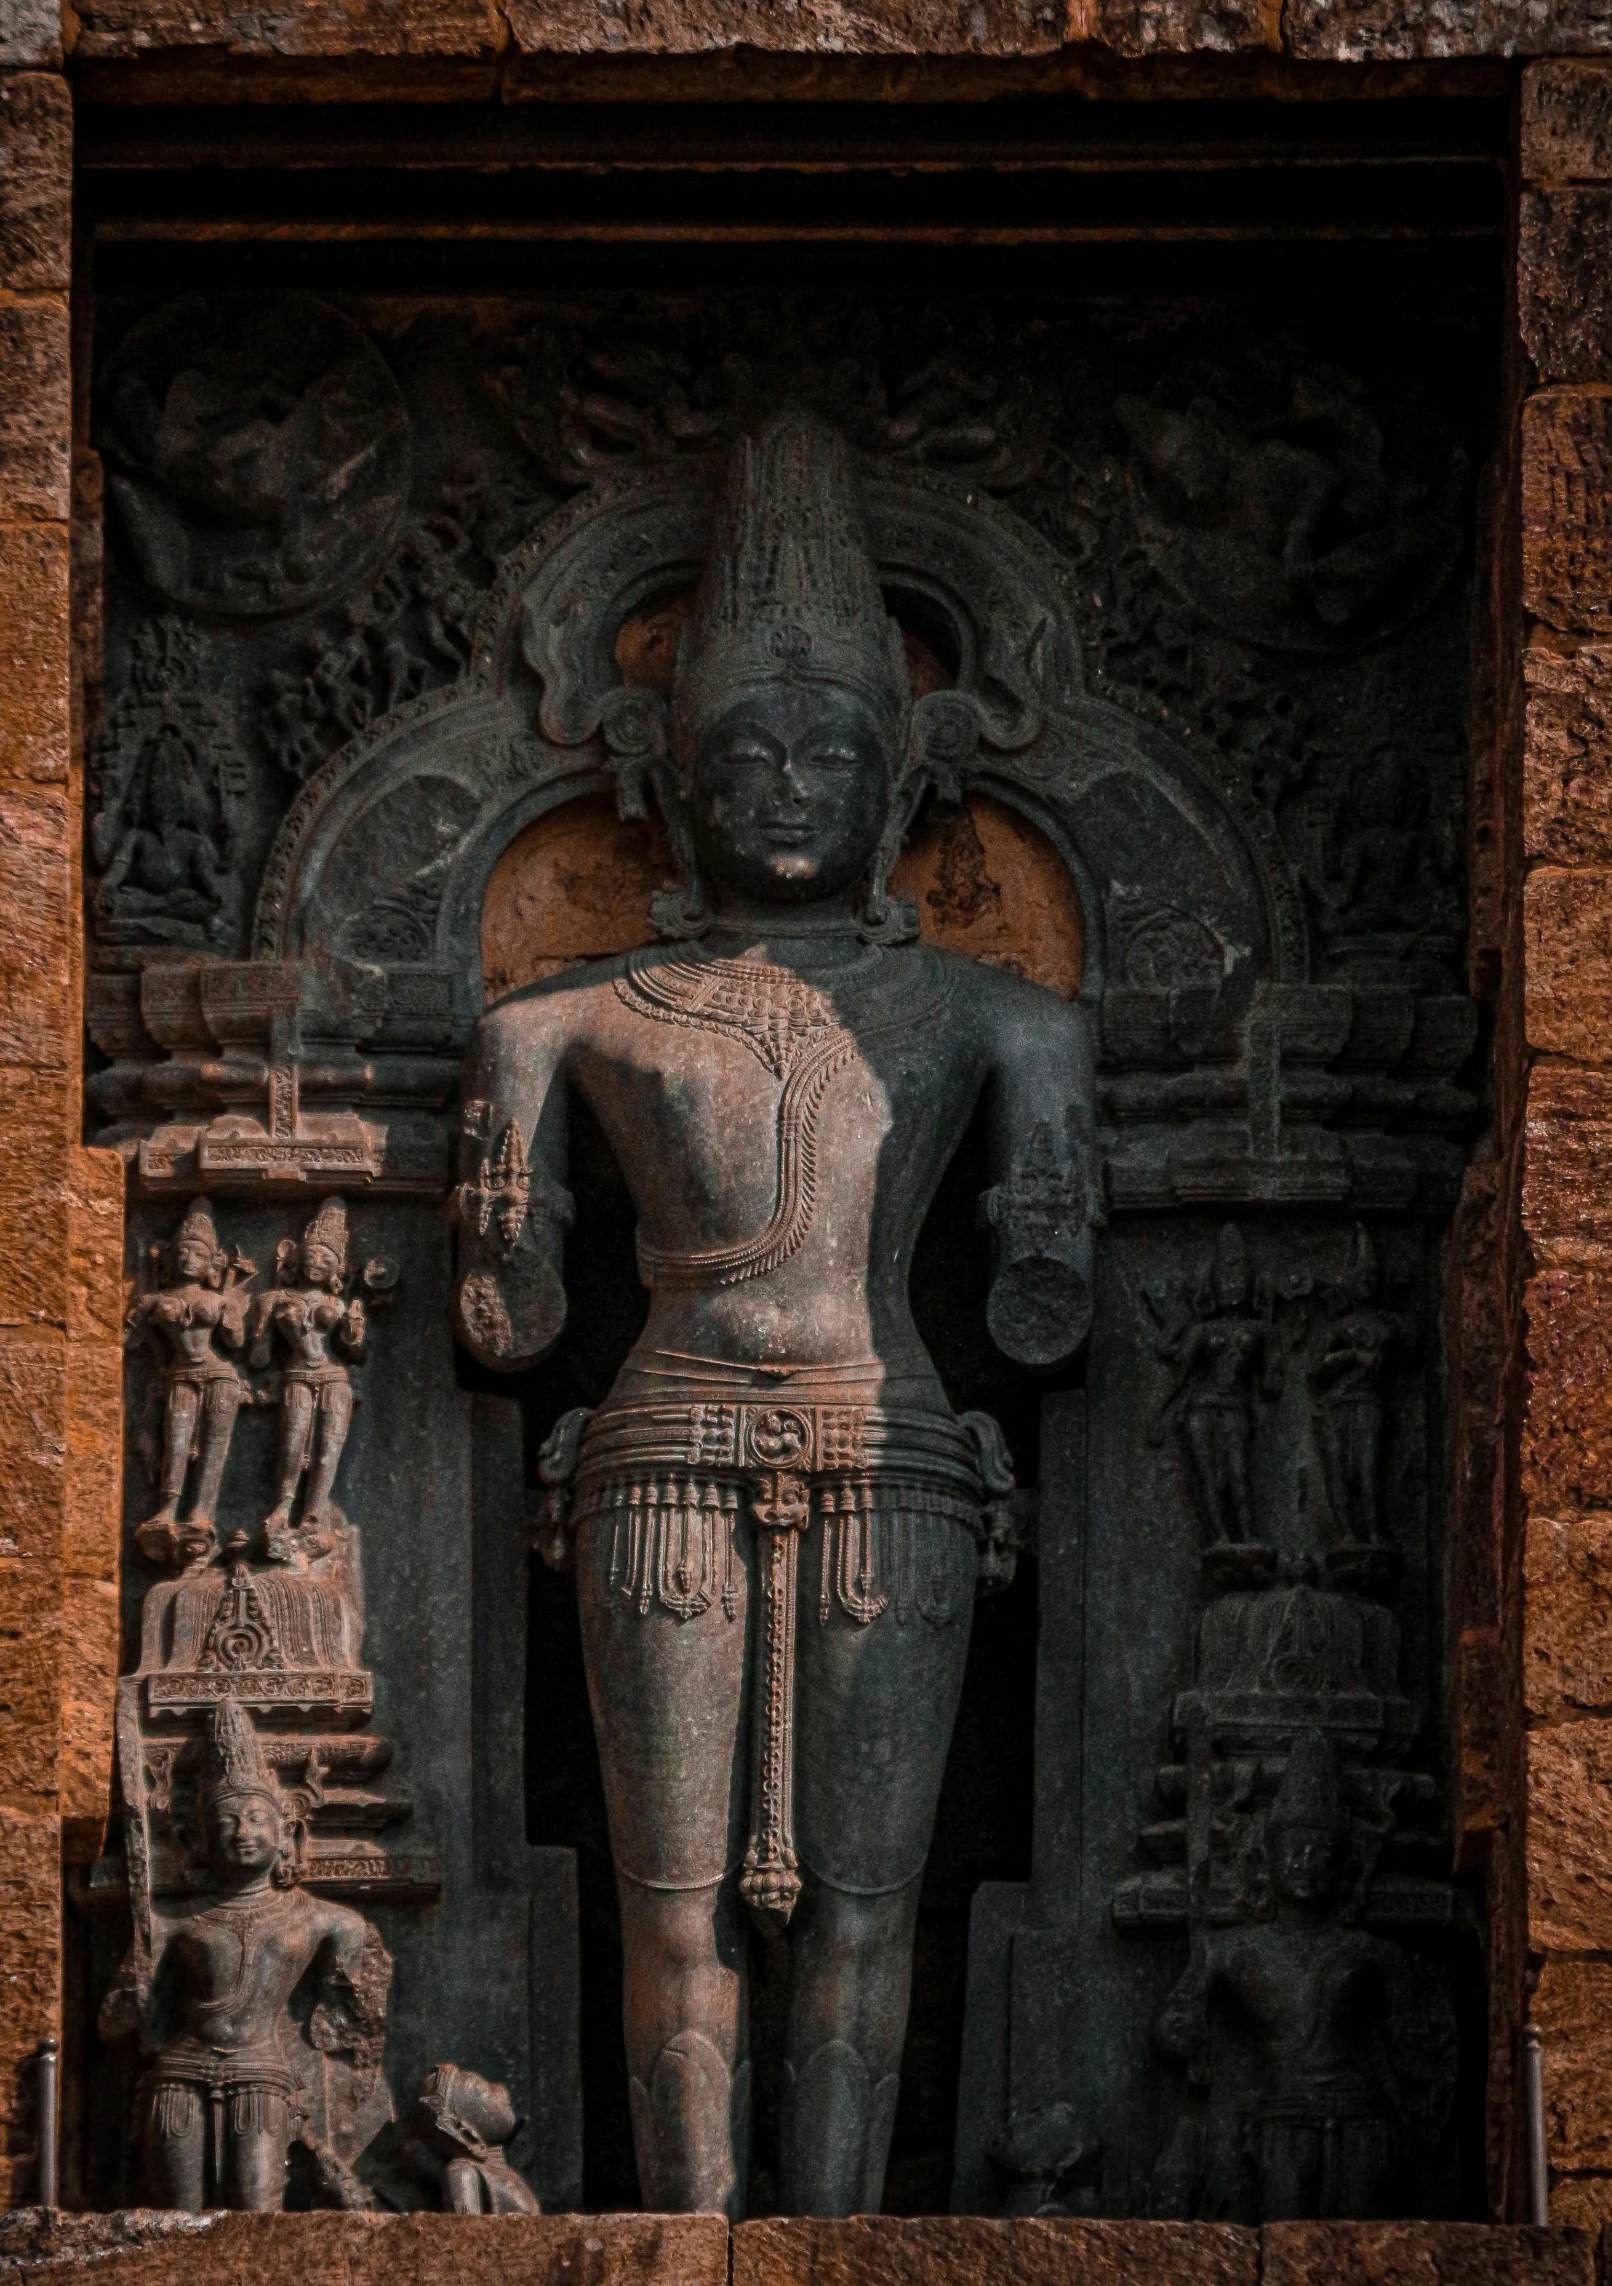 a stone statue is shown behind a doorway